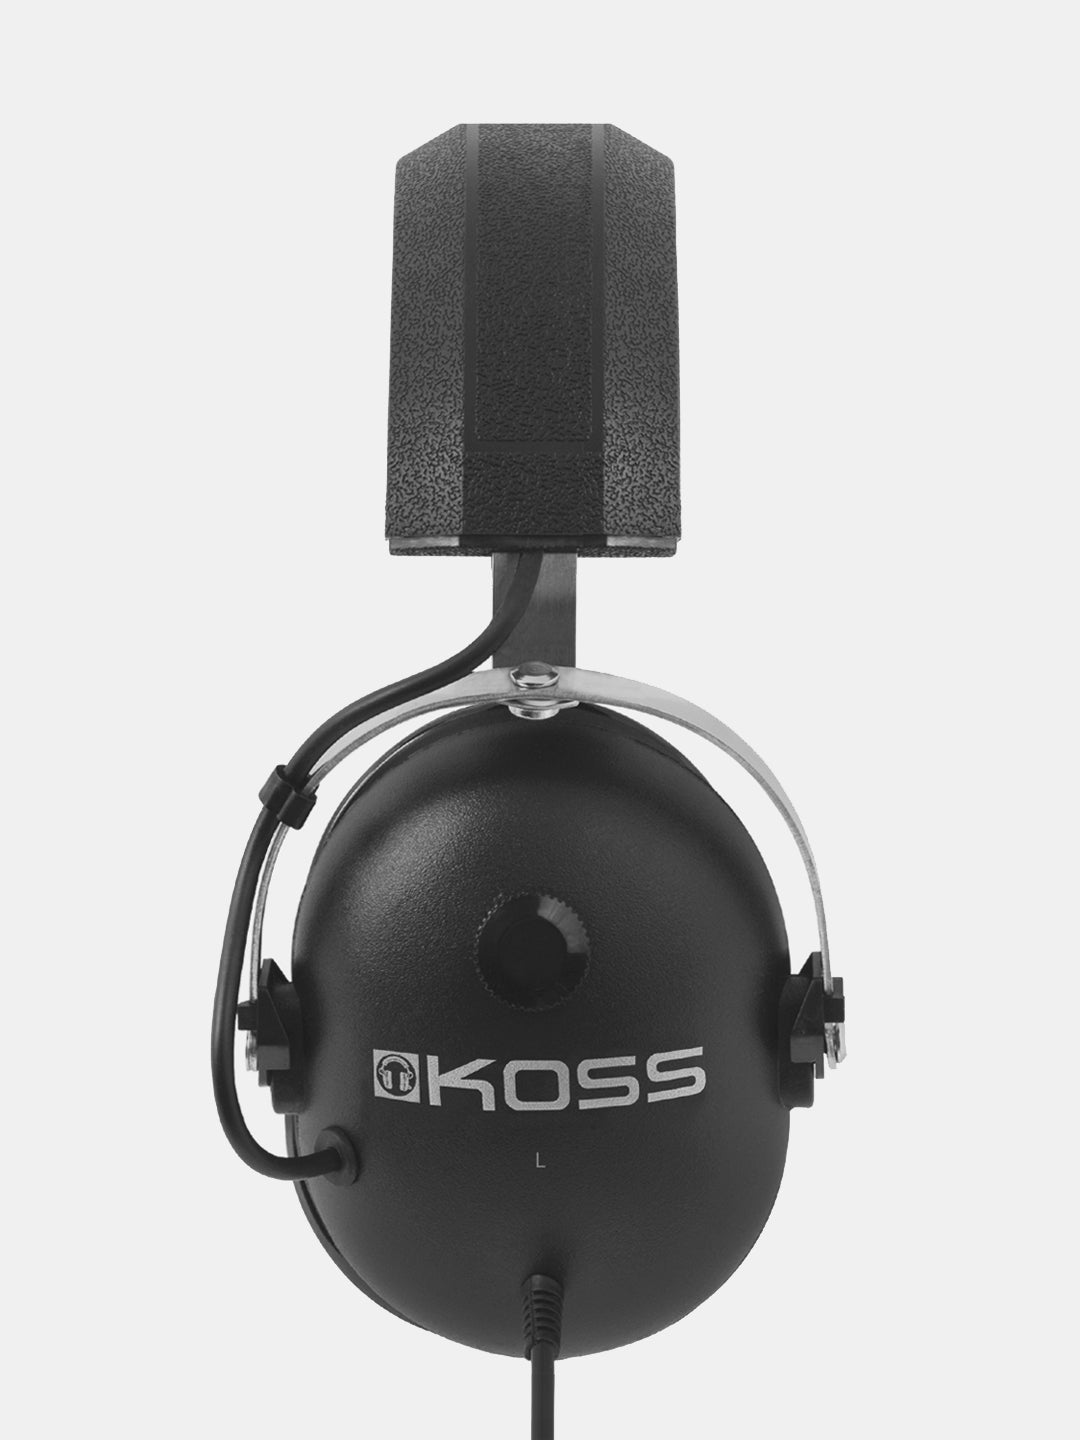 Noise Cancelling Headphones – Koss Stereophones